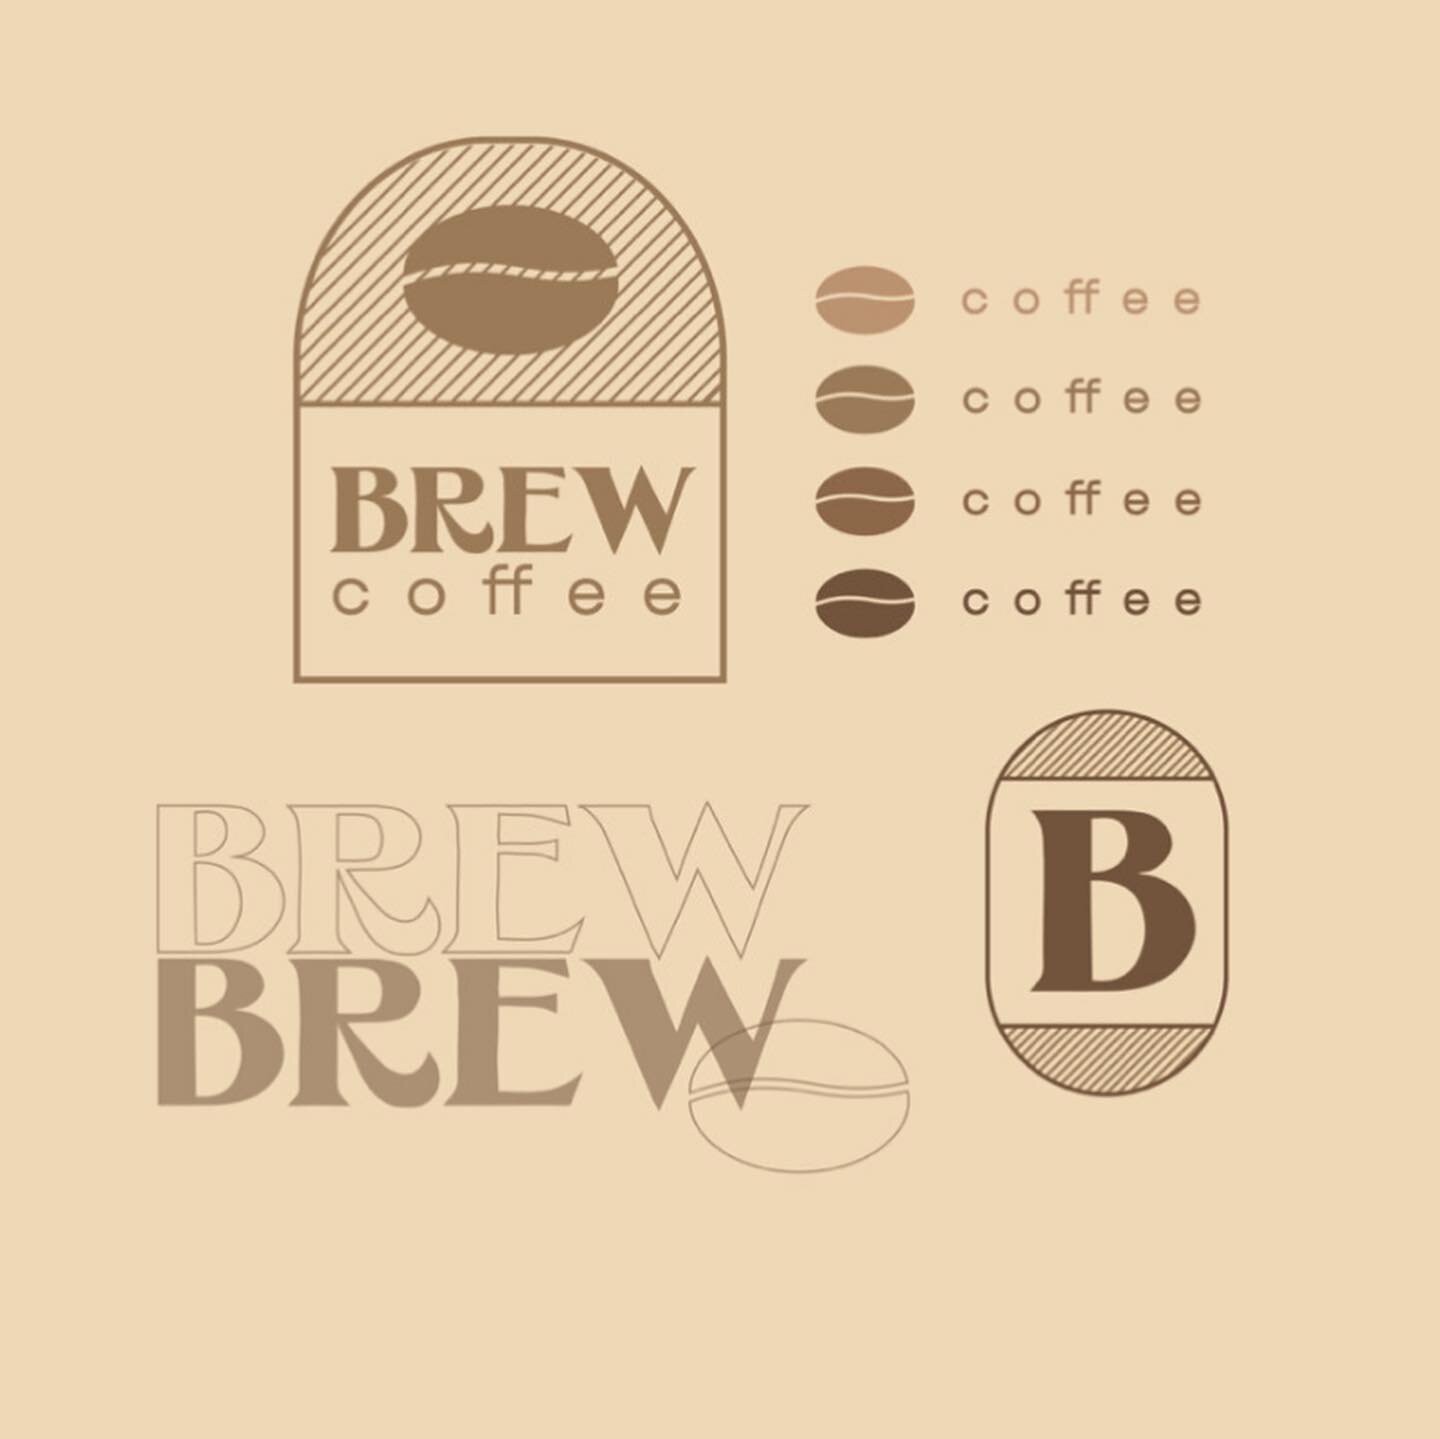 Mocked up some branding for an imaginary coffee brand to practice cohesive design. I think overall it turned out looking nice. Who else tries coffee based on their packaging?